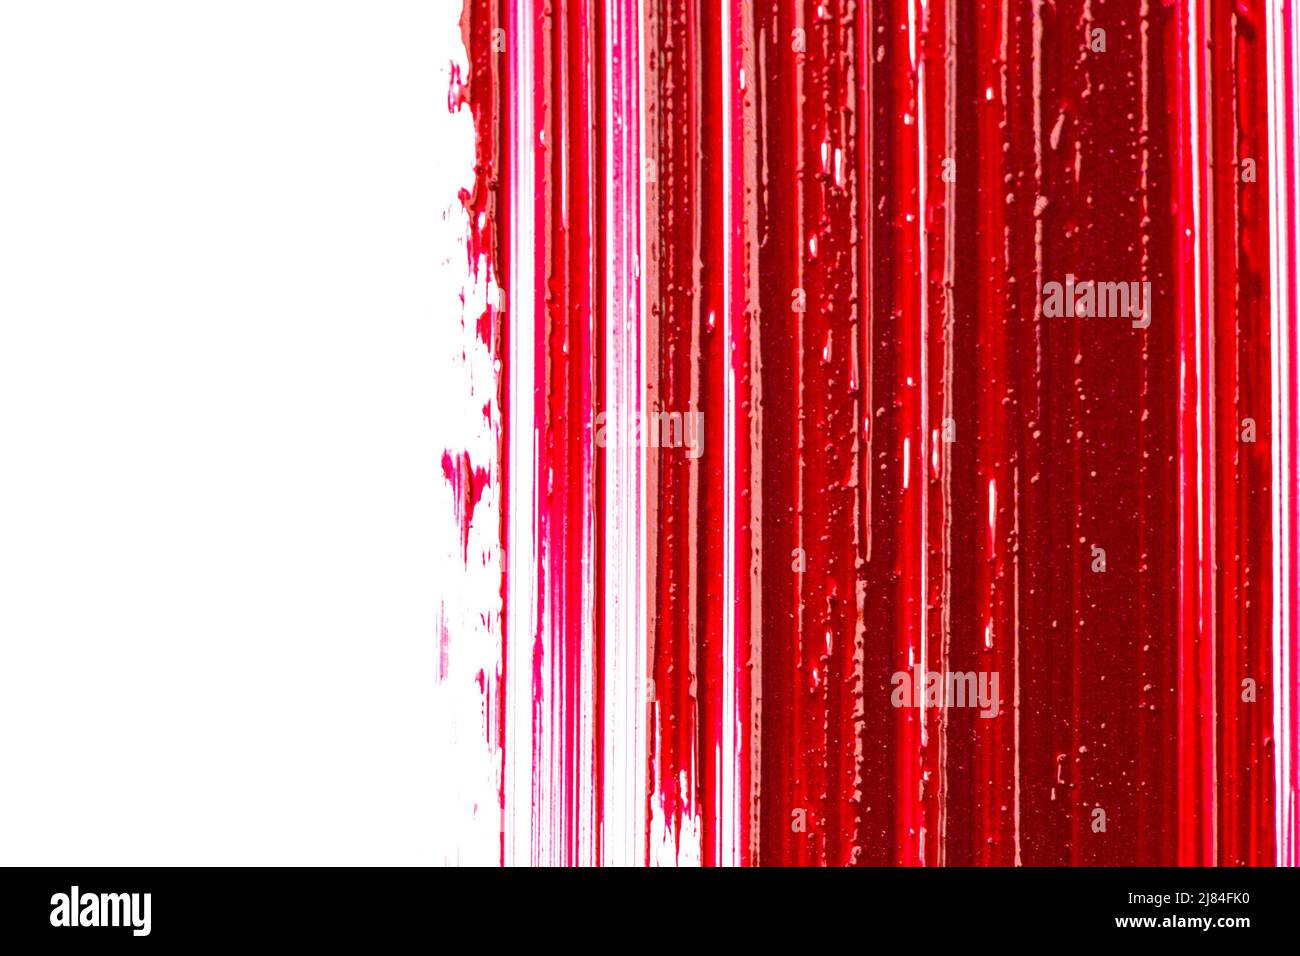 Lipstick texture on a white background. red lipstick surface. lipstick background.Makeup and cosmetics product Stock Photo